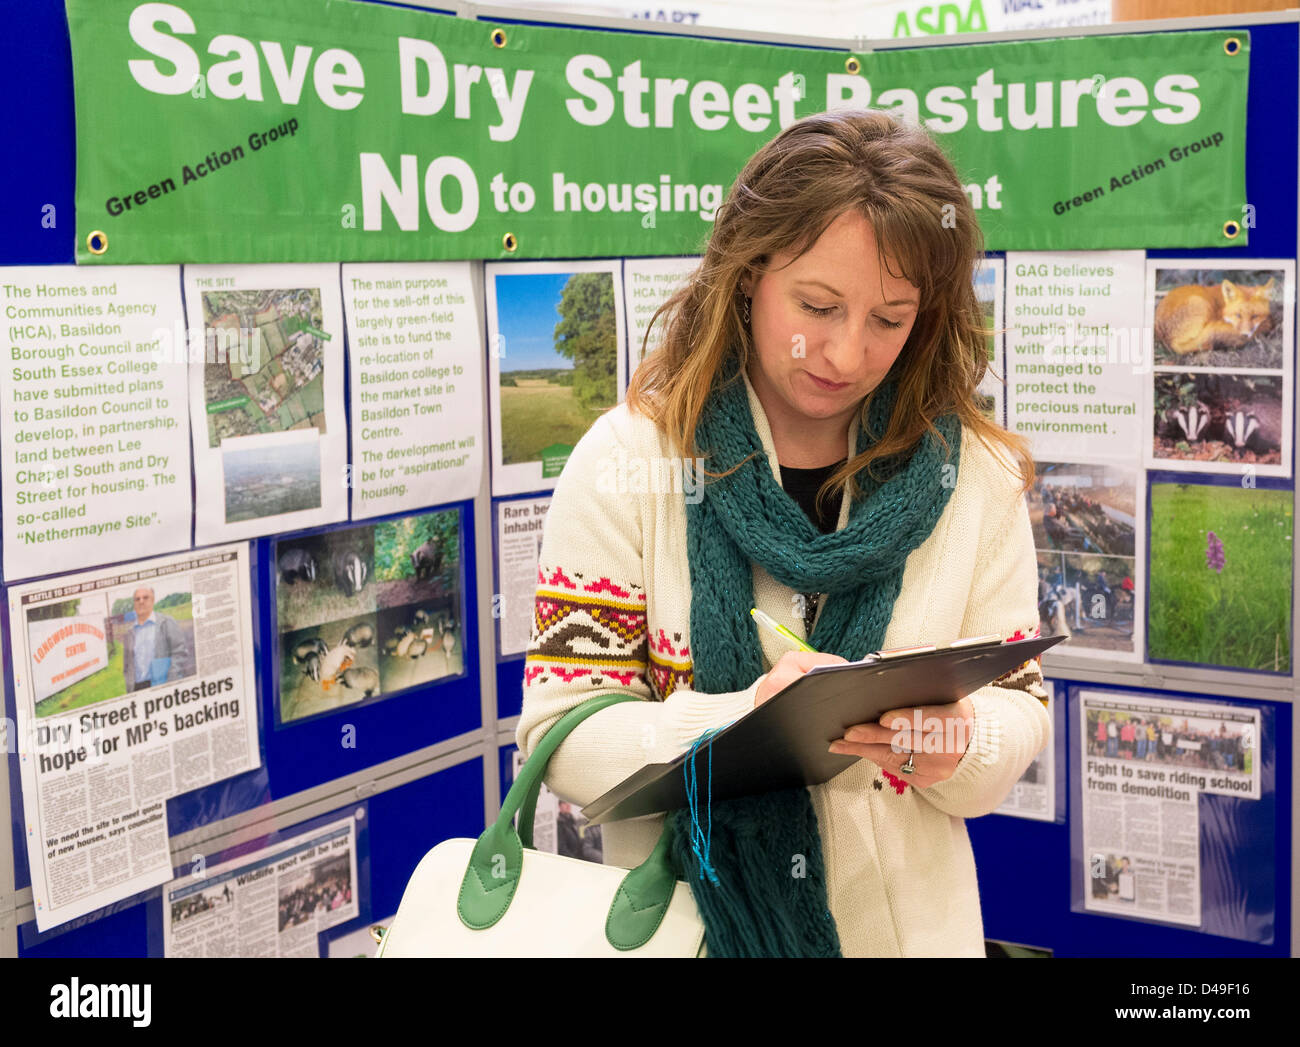 Eastgate Shopping Centre, Basildon, Essex, UK. 9th March 2013.  A member of the Basildon public adds her name to a petition to protest against the building of 750 new houses on the Dry Street Pastures greenfield site.  A unique wildlife habitat will be lost to the people of Basildon once this development goes ahead.  Photographer: Gordon Scammell/Alamy Live News Stock Photo